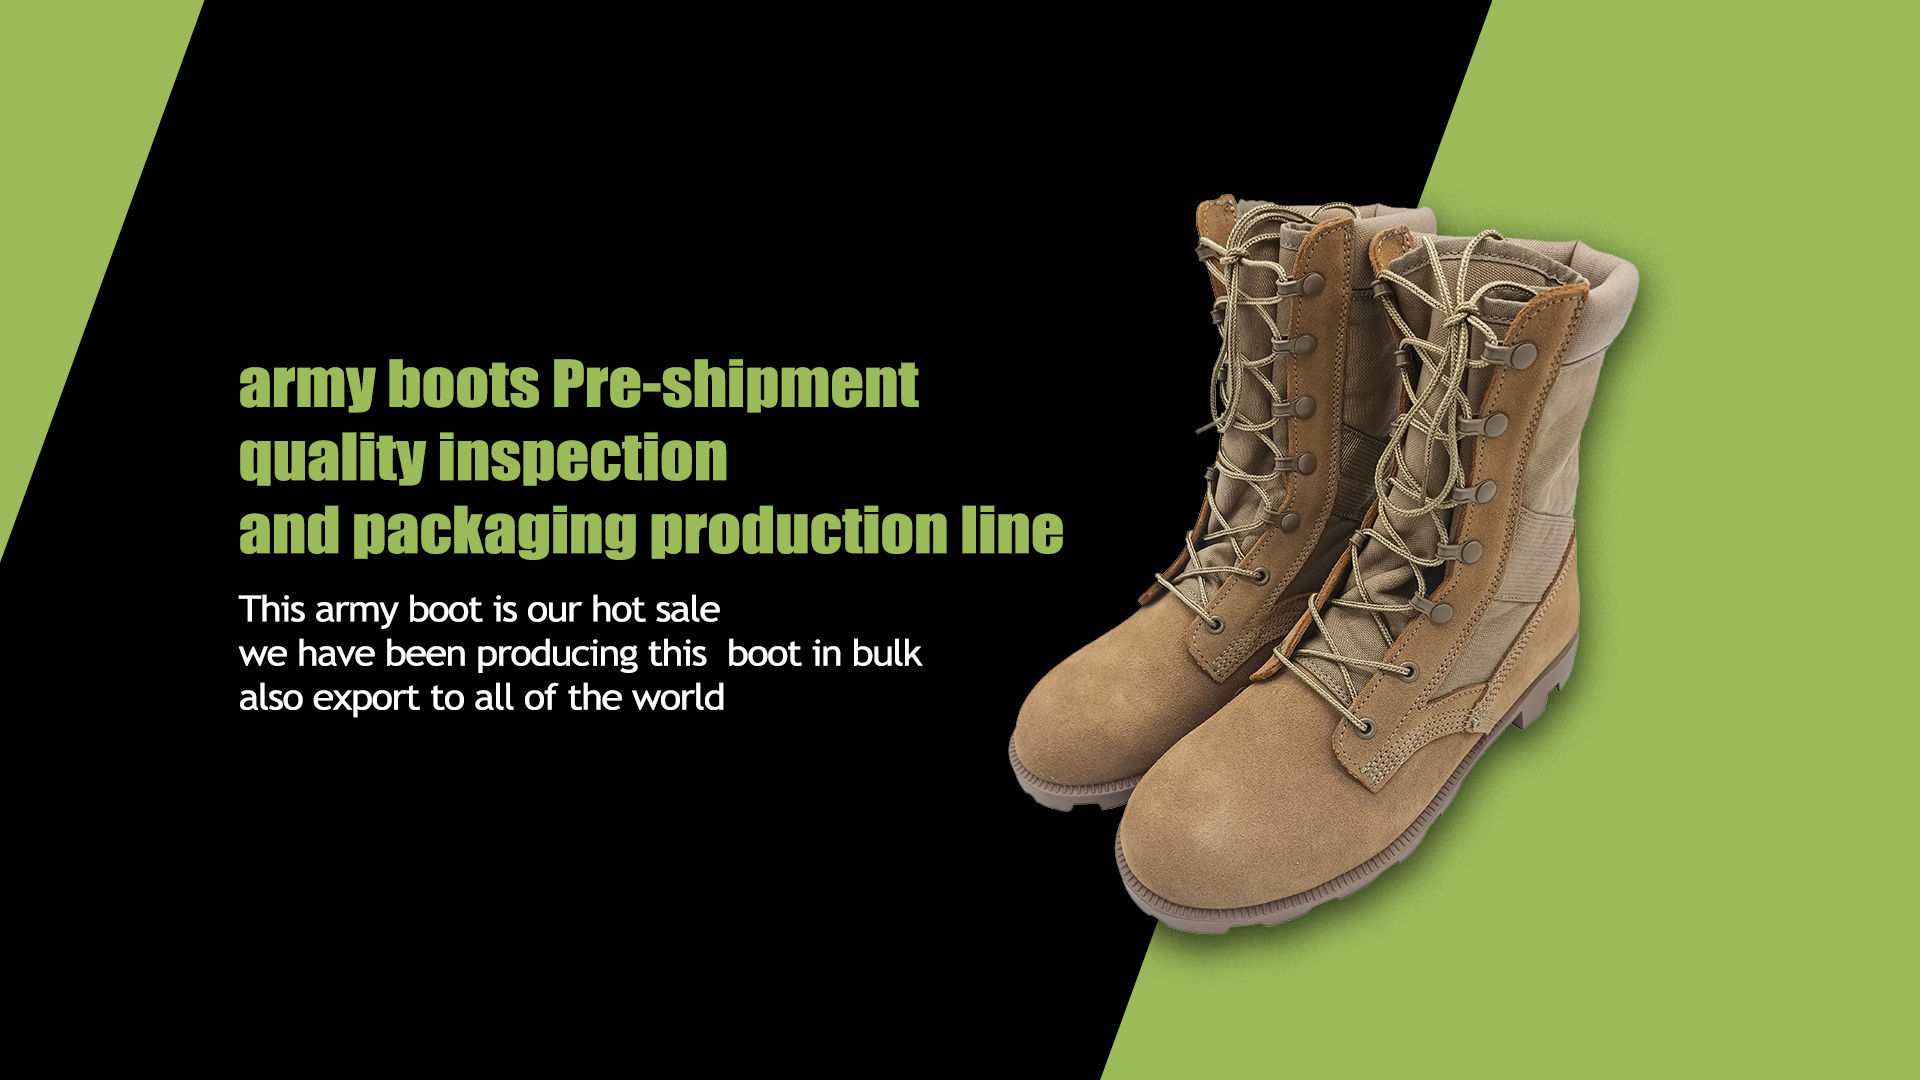 army boots Pre-shipment quality inspection and packaging production line